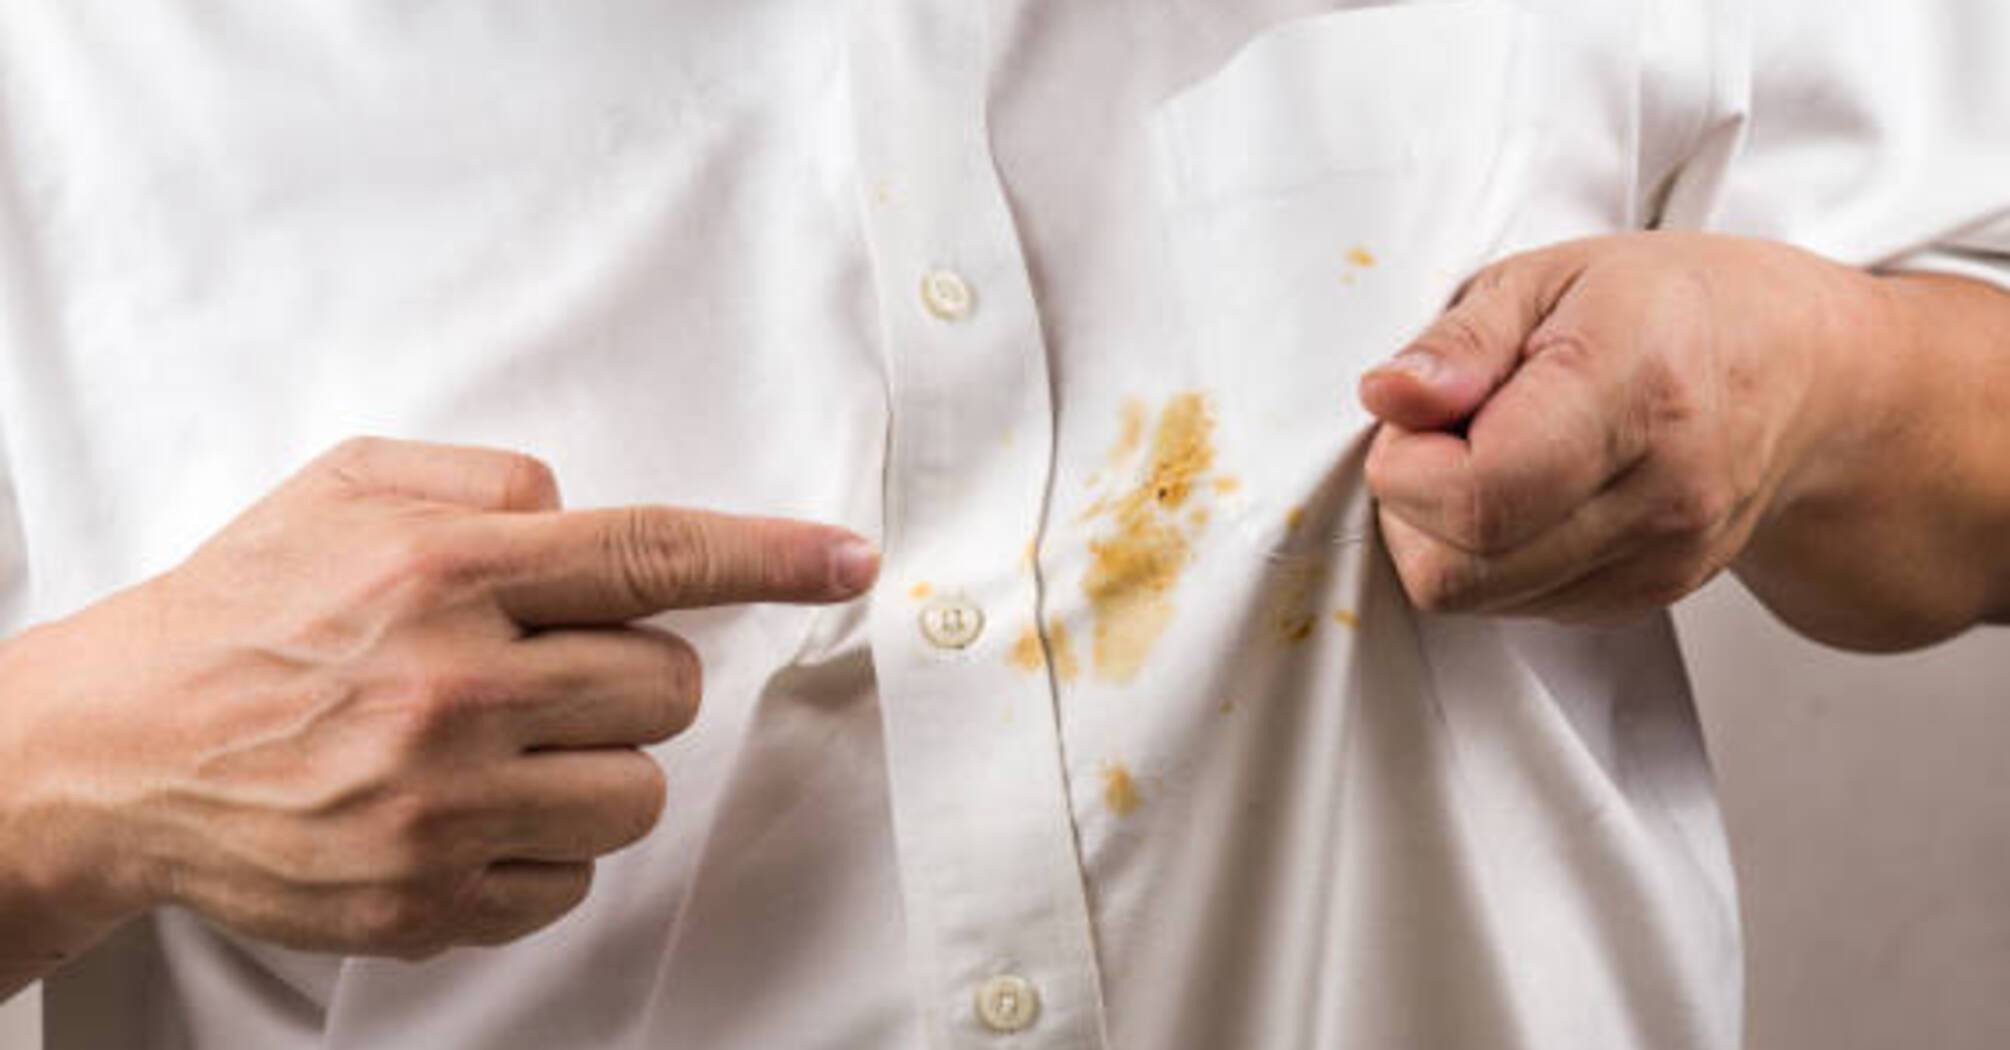 How to get rid of stains on clothes quickly and effectively: 3 unconventional life hacks